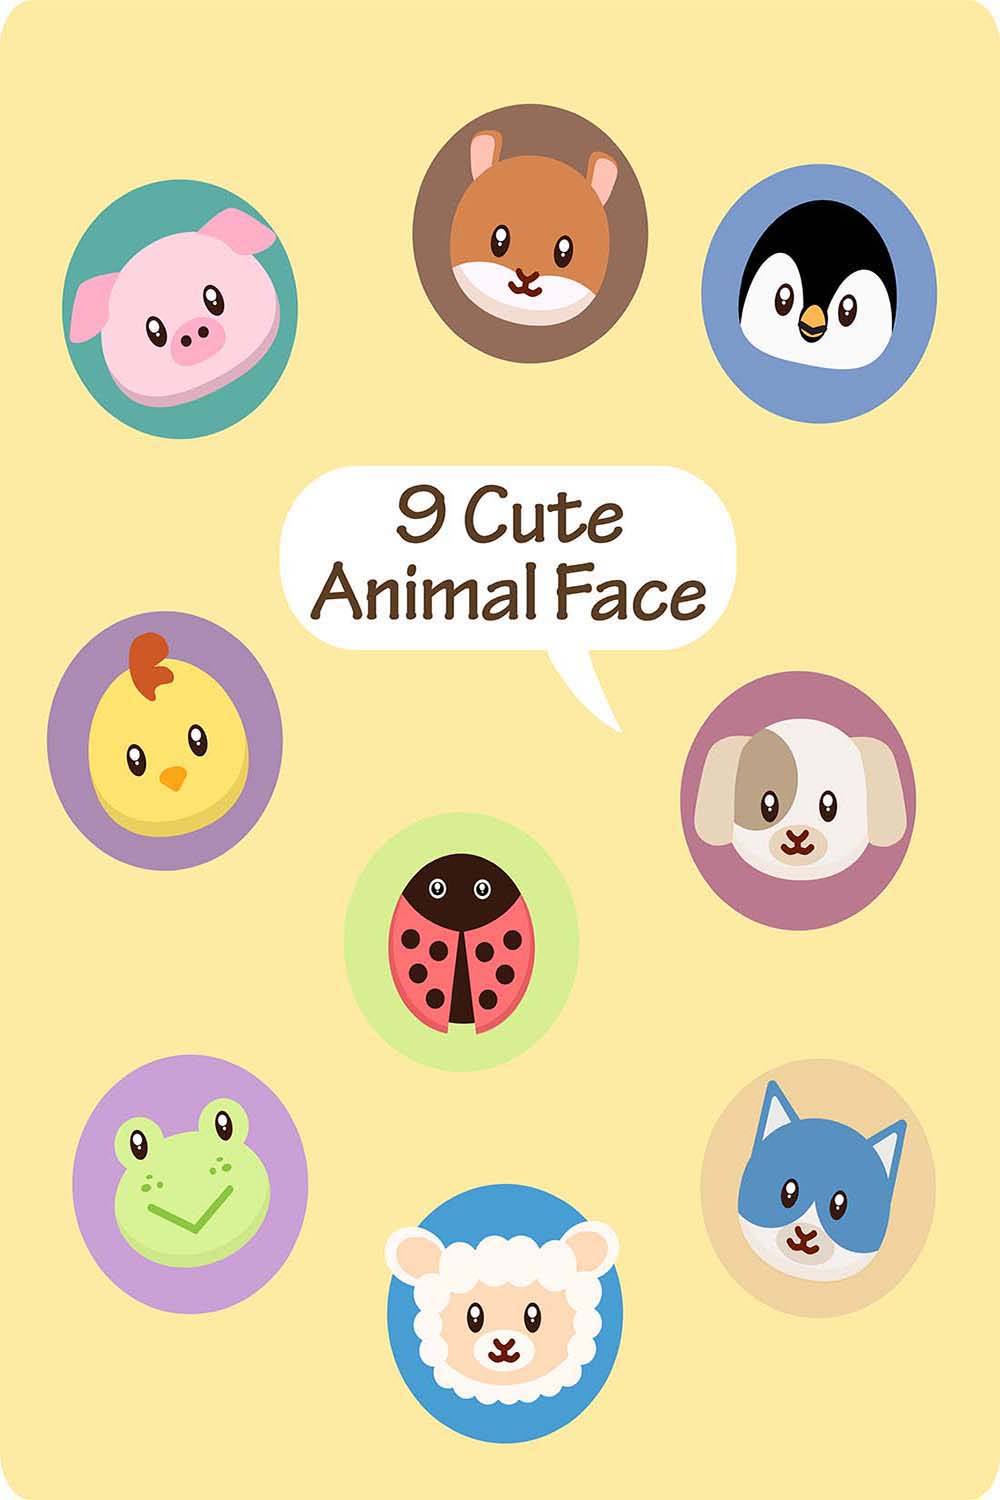 preview 9 cute animal face 1 1